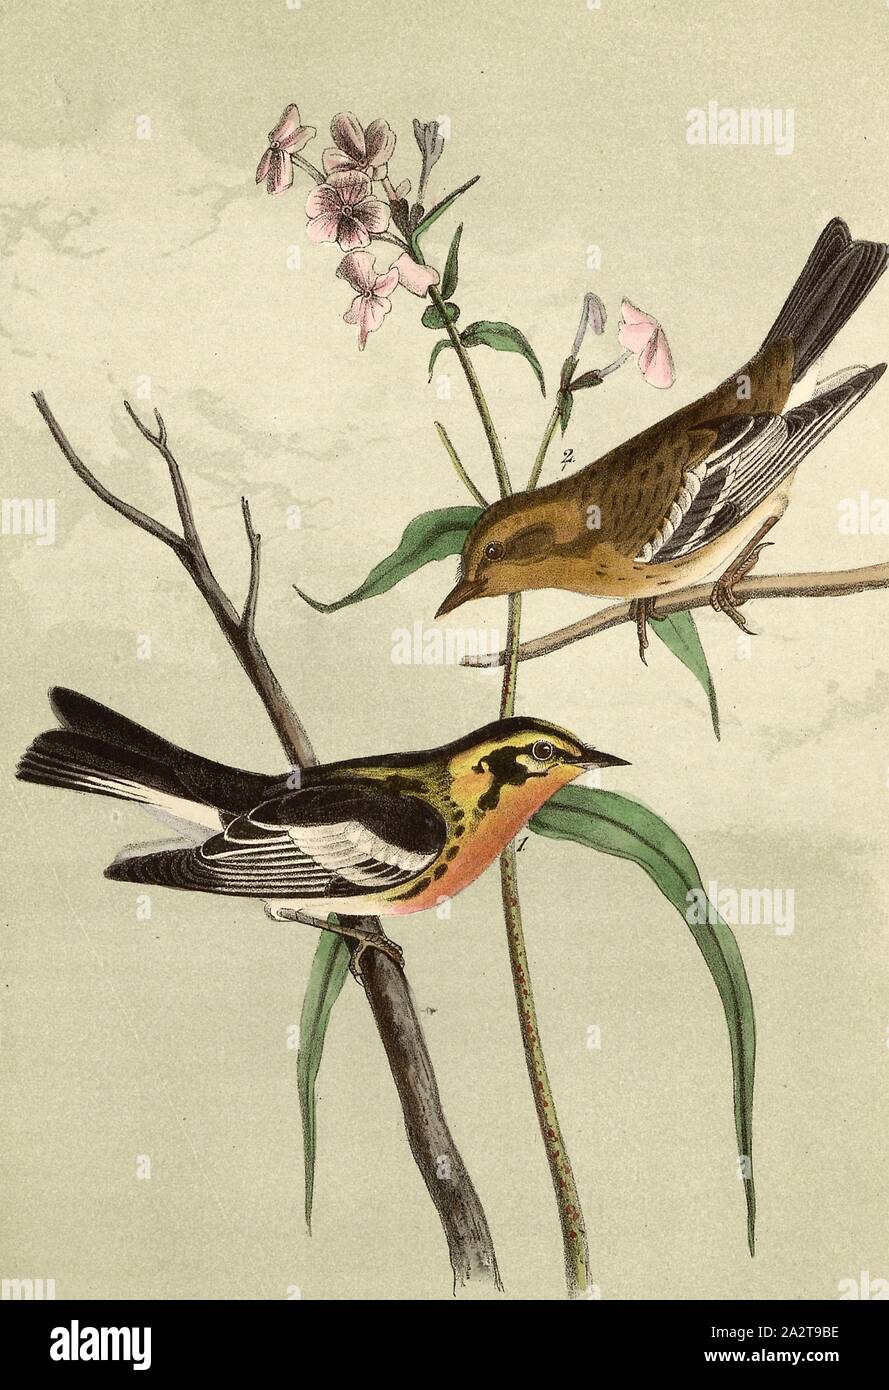 Blackburnian Wood Warbler - Phlox maculata, Spruce Warbler (Dendroica fusca, Sylvicola blackburniae), Signed: J.J. Audubon, J.T. Bowen, lithograph, Pl. 87 (vol. 2), Audubon, John James (drawn); Bowen, J. T. (lith.), 1856, John James Audubon: The birds of America: from drawings made in the United States and their territories. New York: Audubon, 1856 Stock Photo